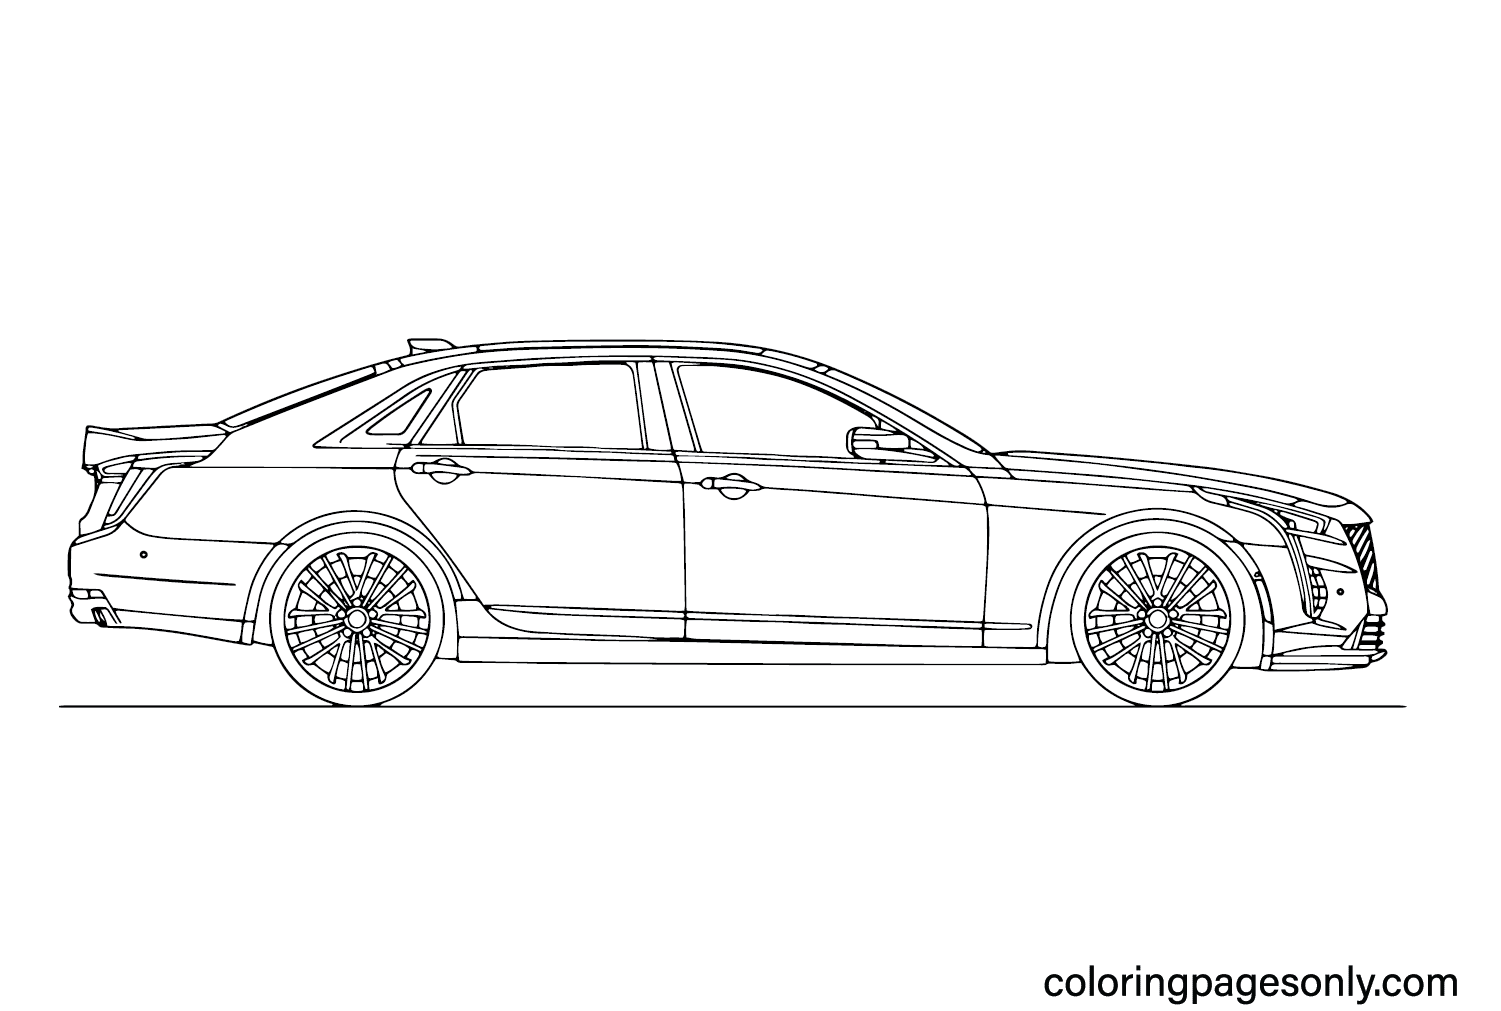 Cadillac CT6 V-Sport Color Page from Cadillac